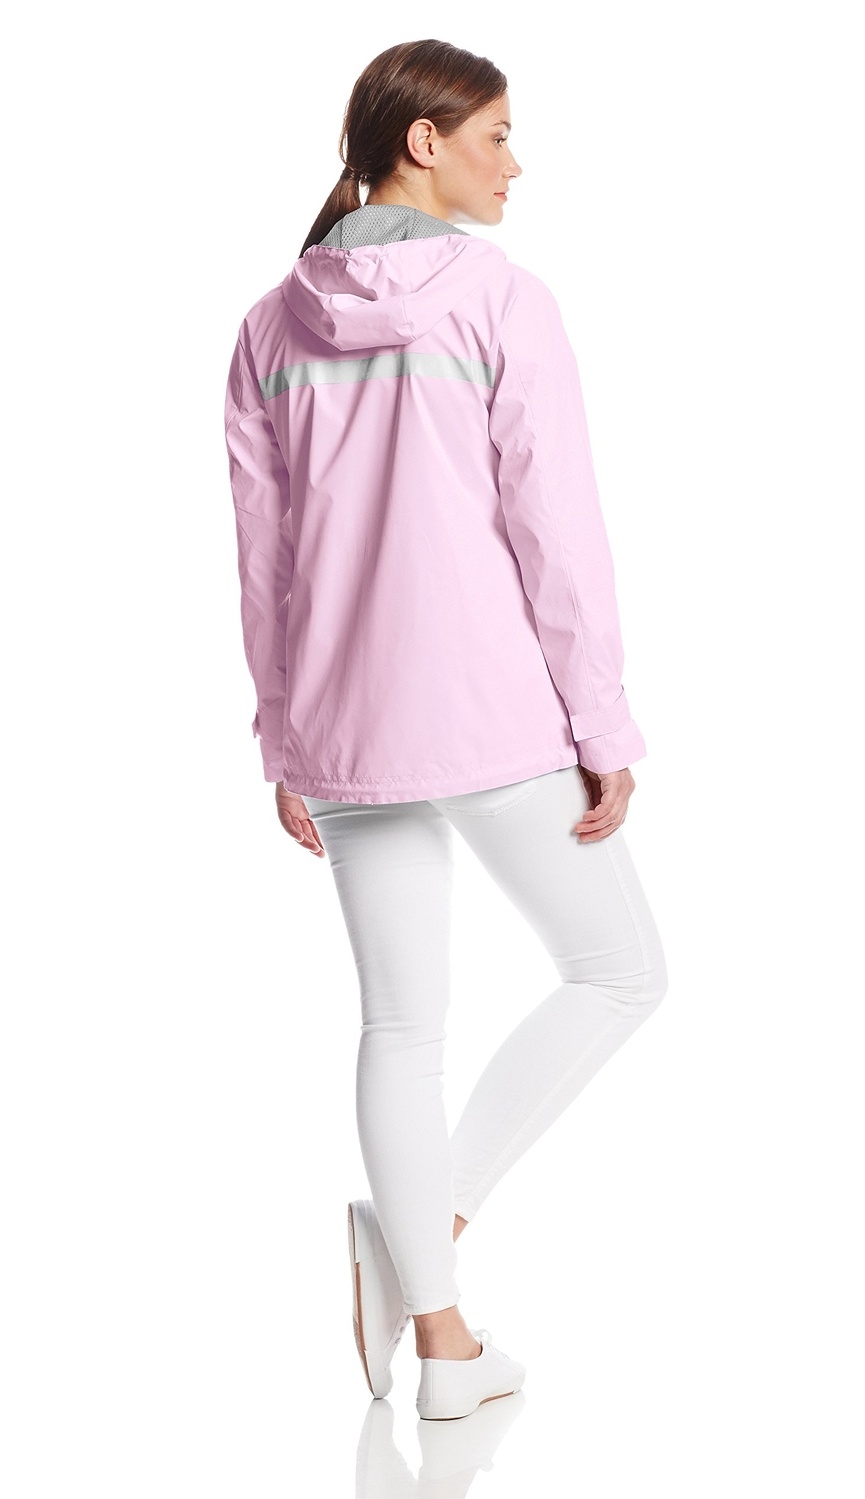 Charles River Women's New Englander Rain Jacket in Pink/Reflective L | 5099 - image 2 of 2